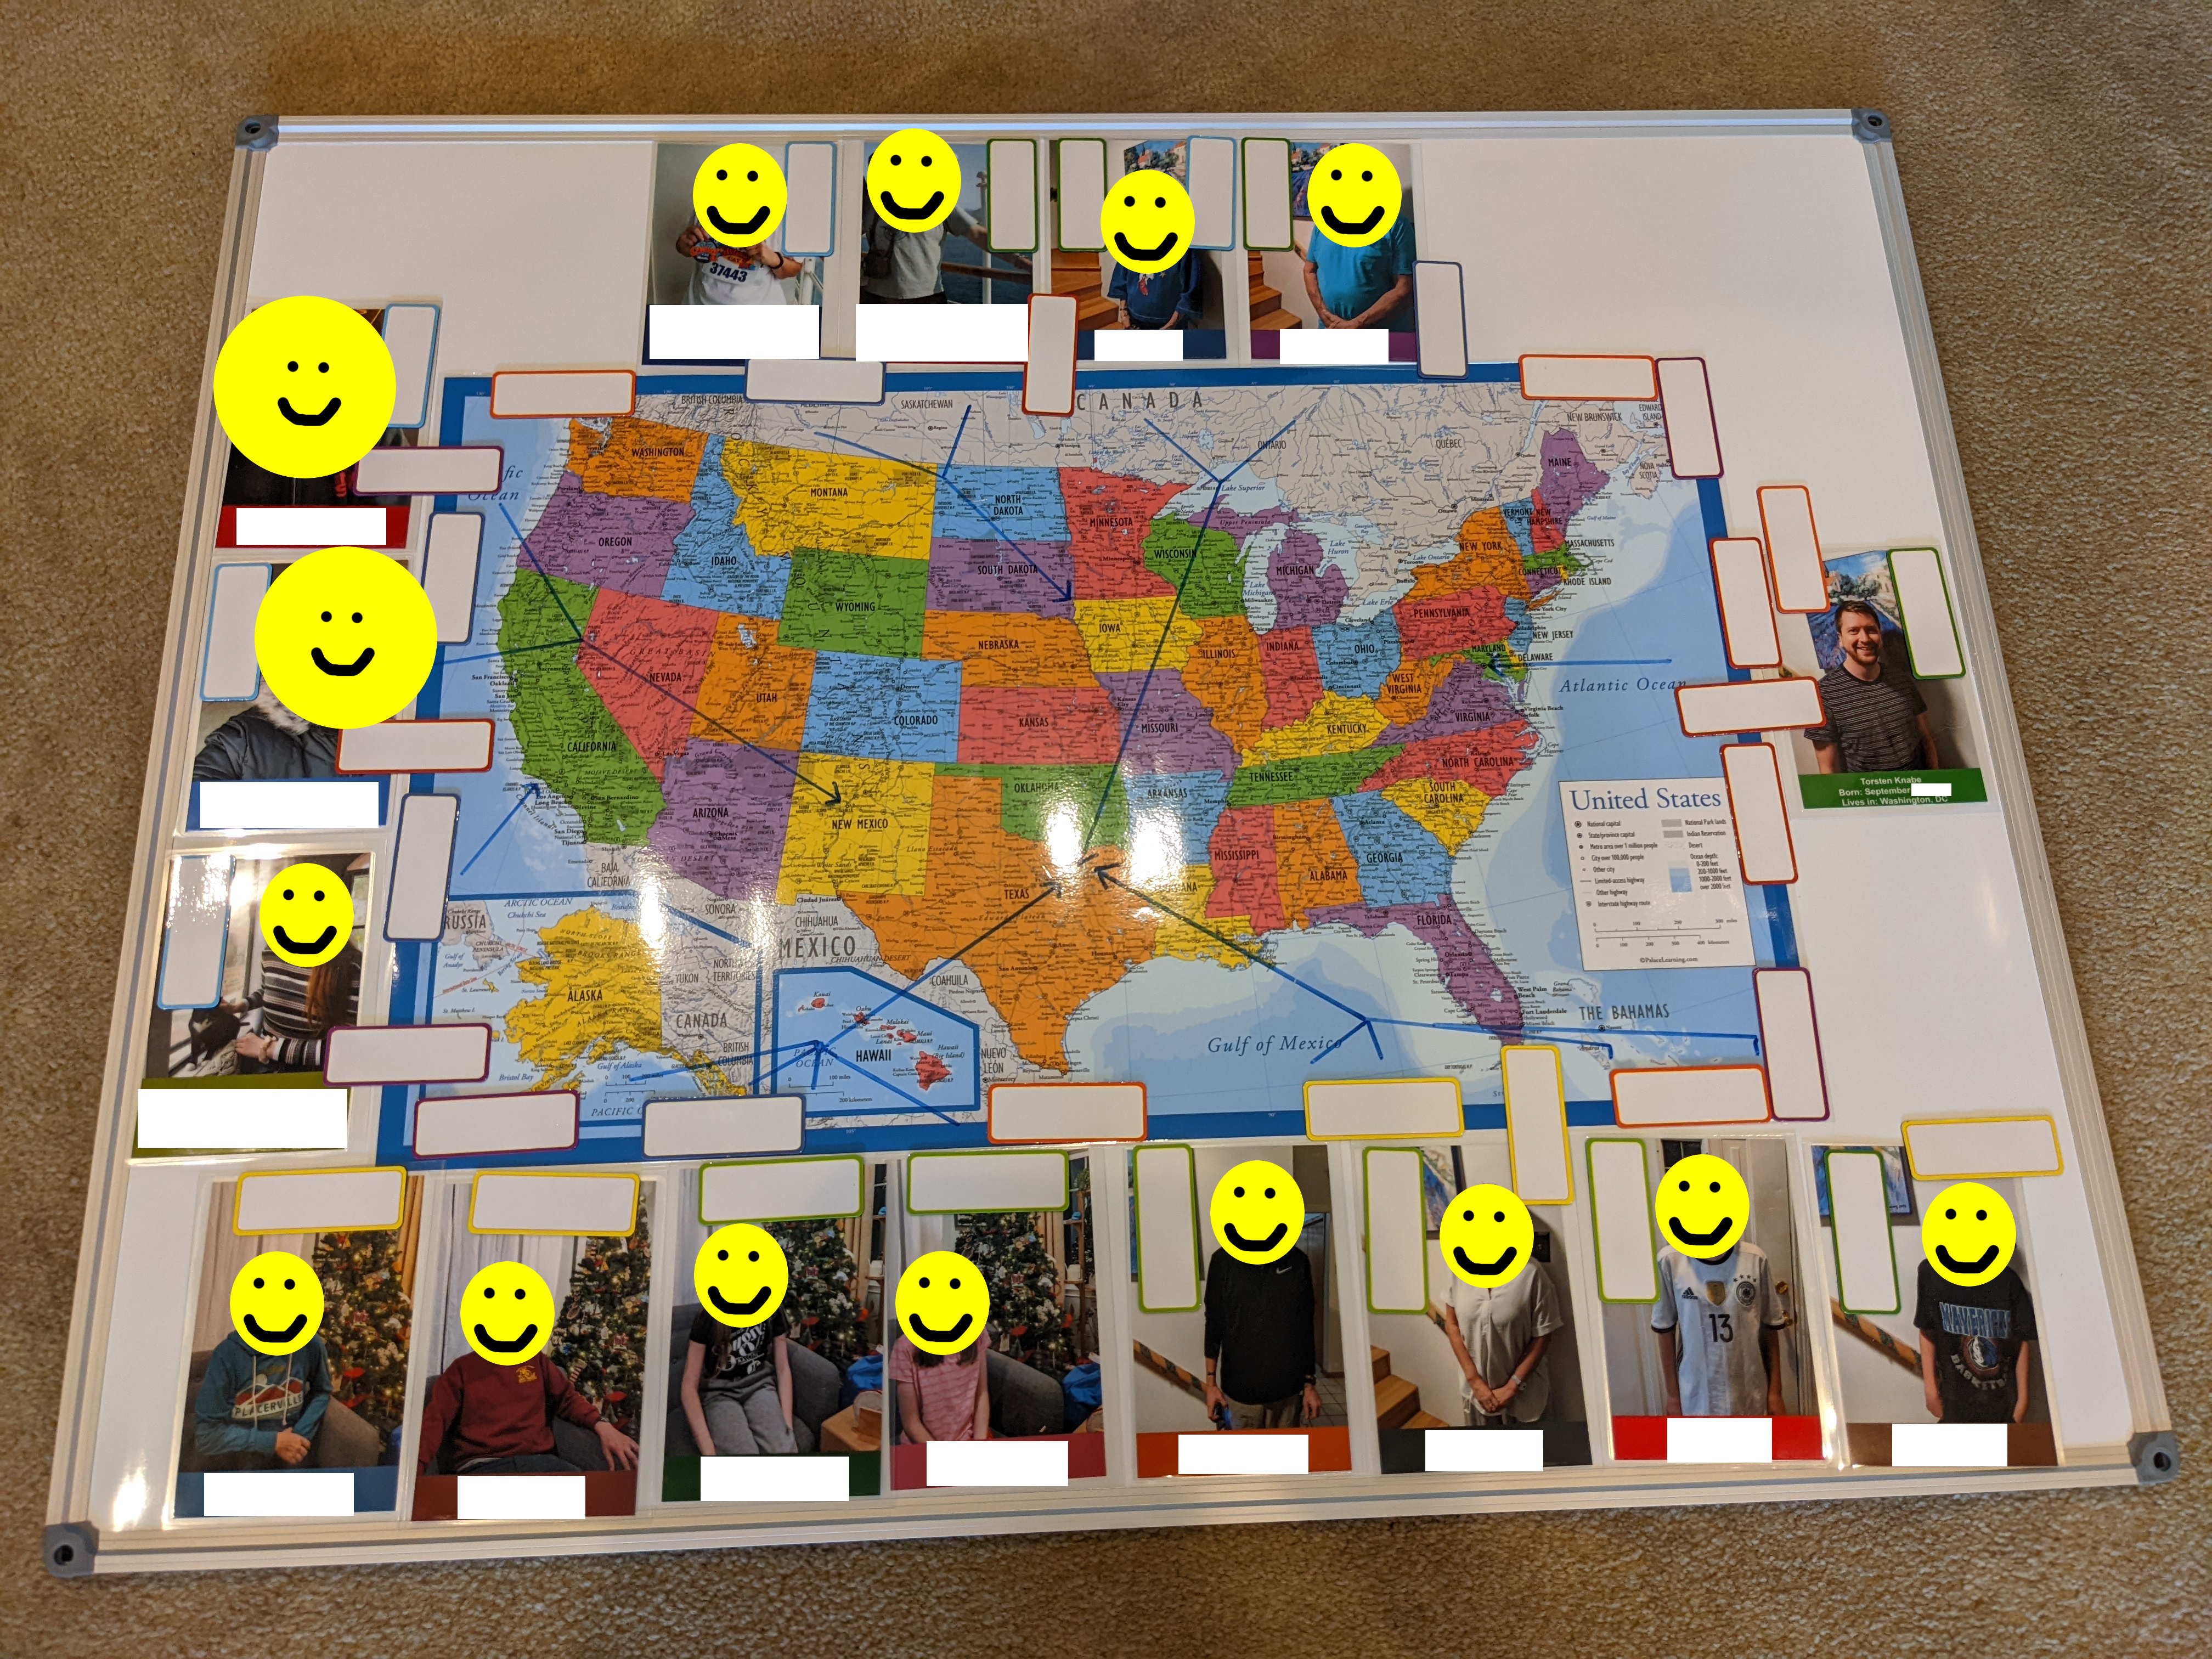 Whiteboard with a laminated US map in the center surrounded by 16 portraits of family members